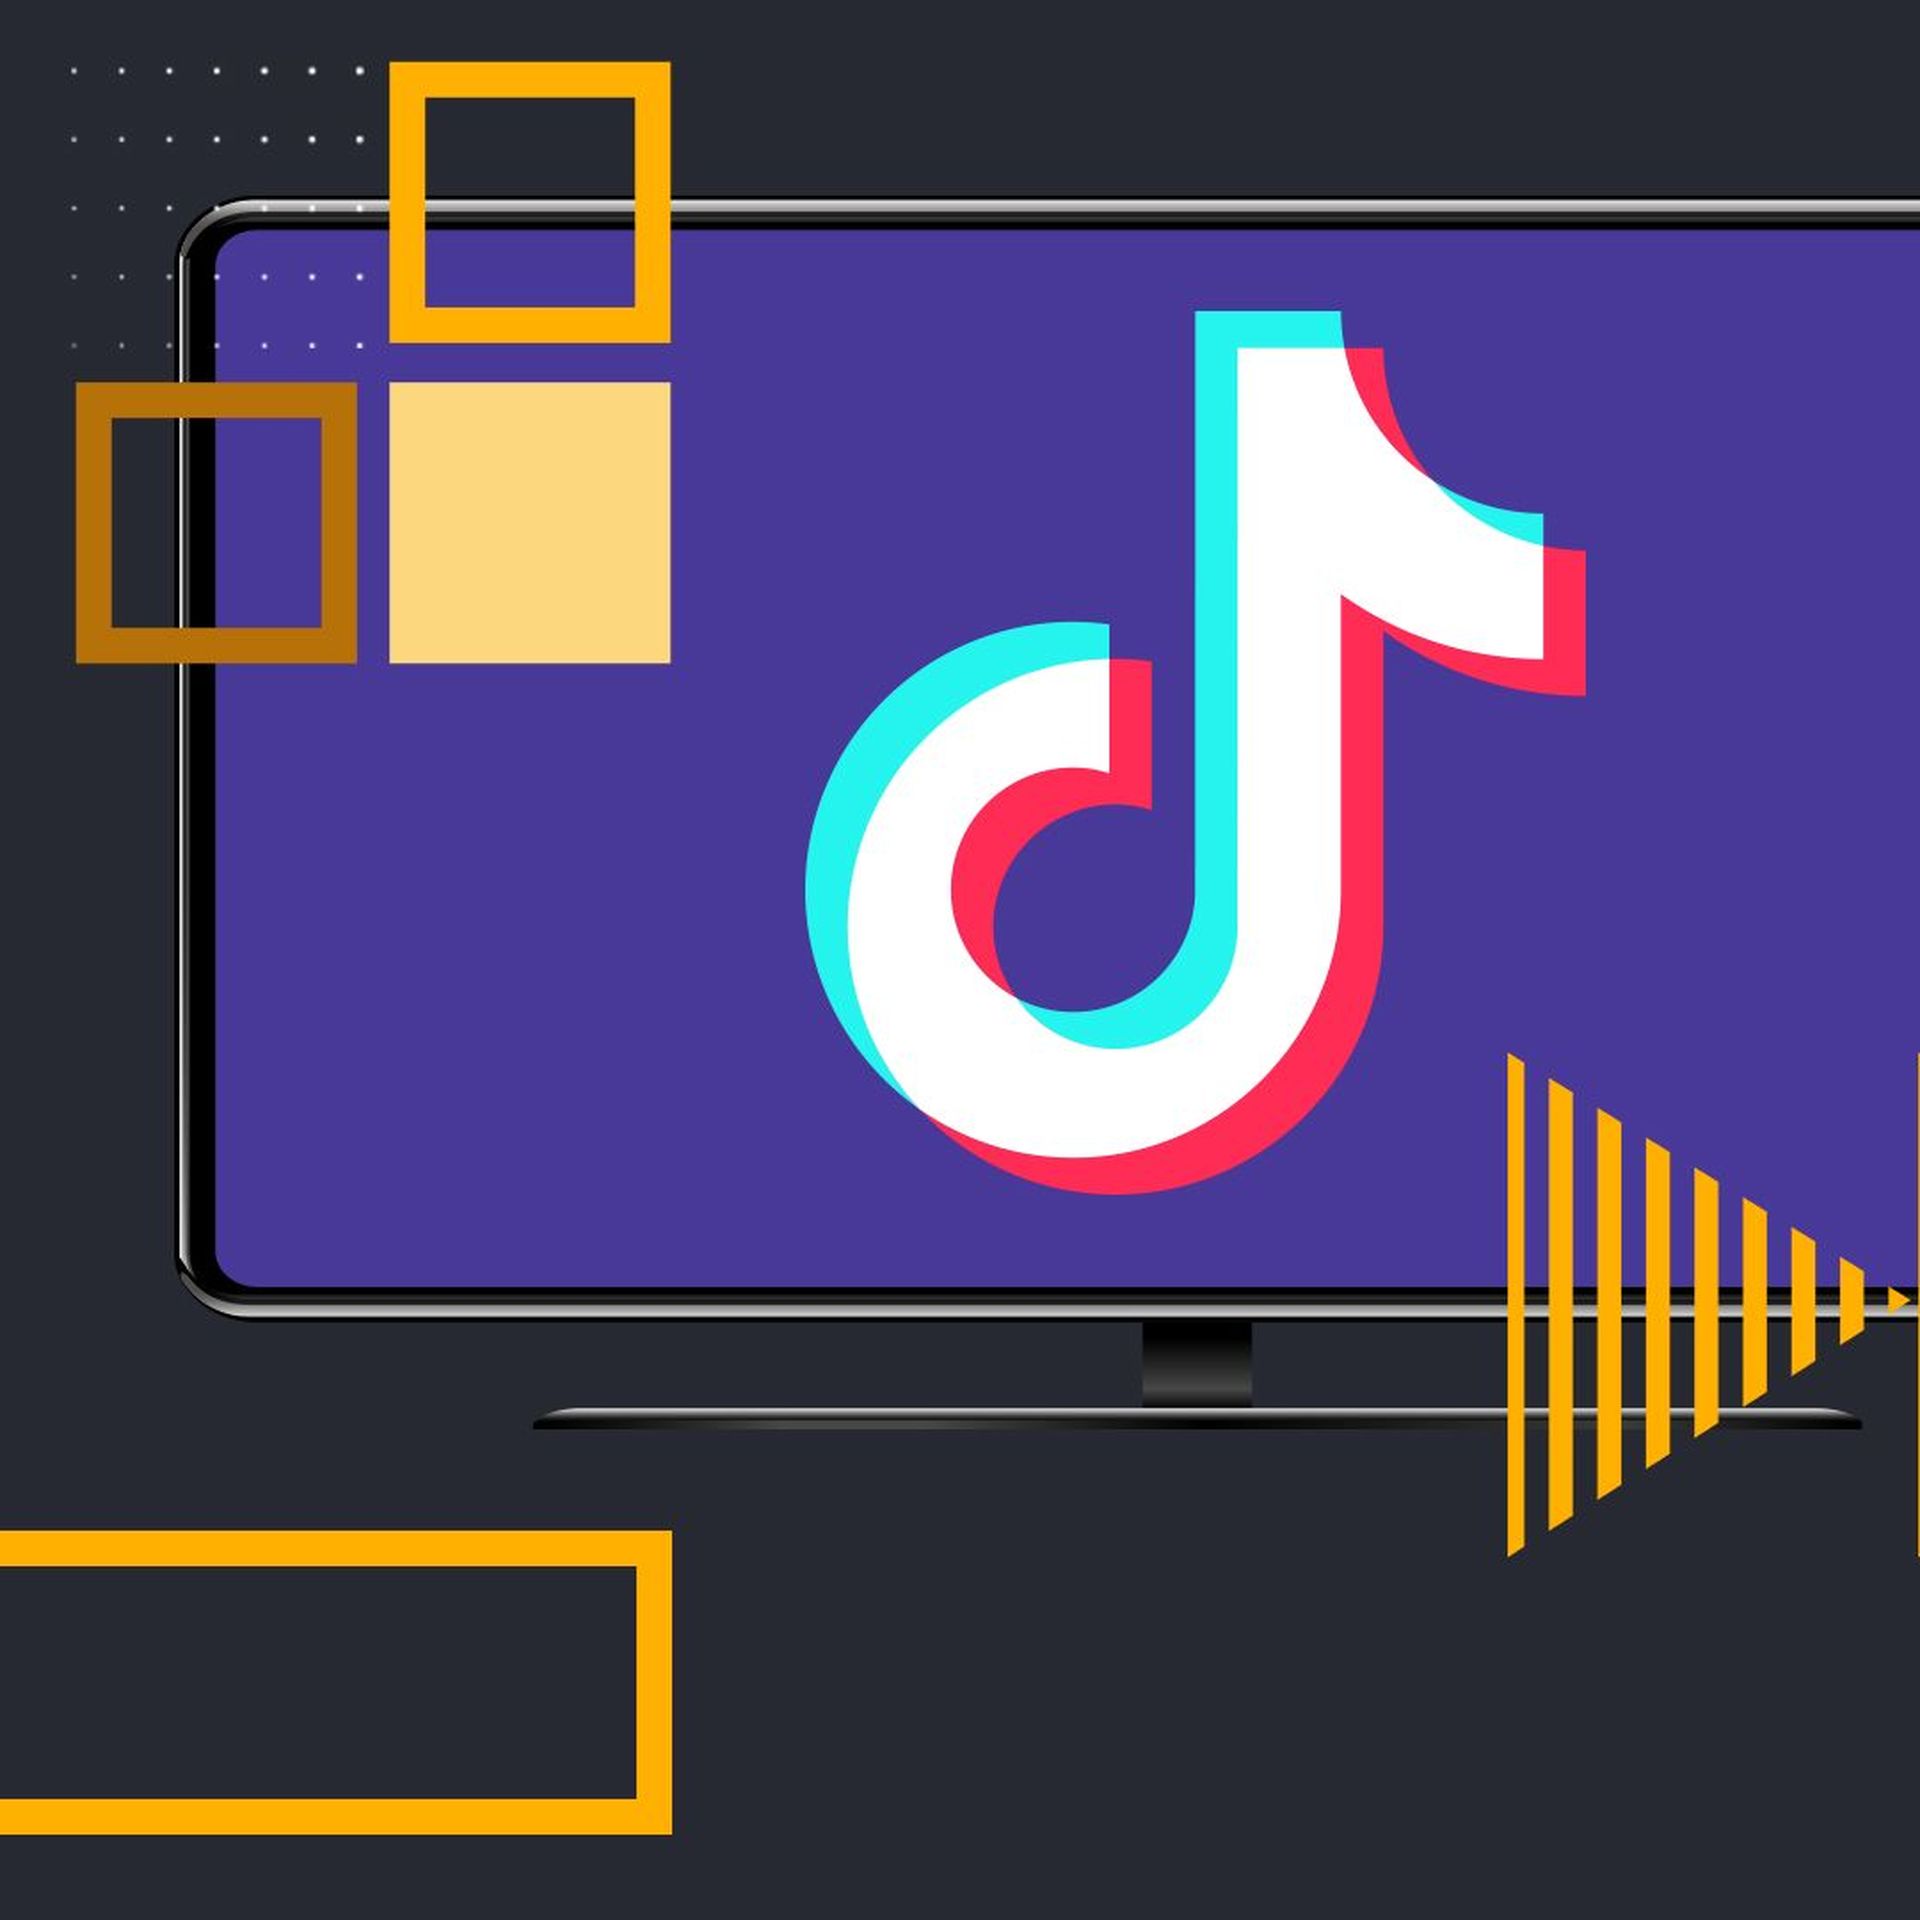 Photo illustration of the TikTok logo on a monitor surrounded by abstract column shapes.